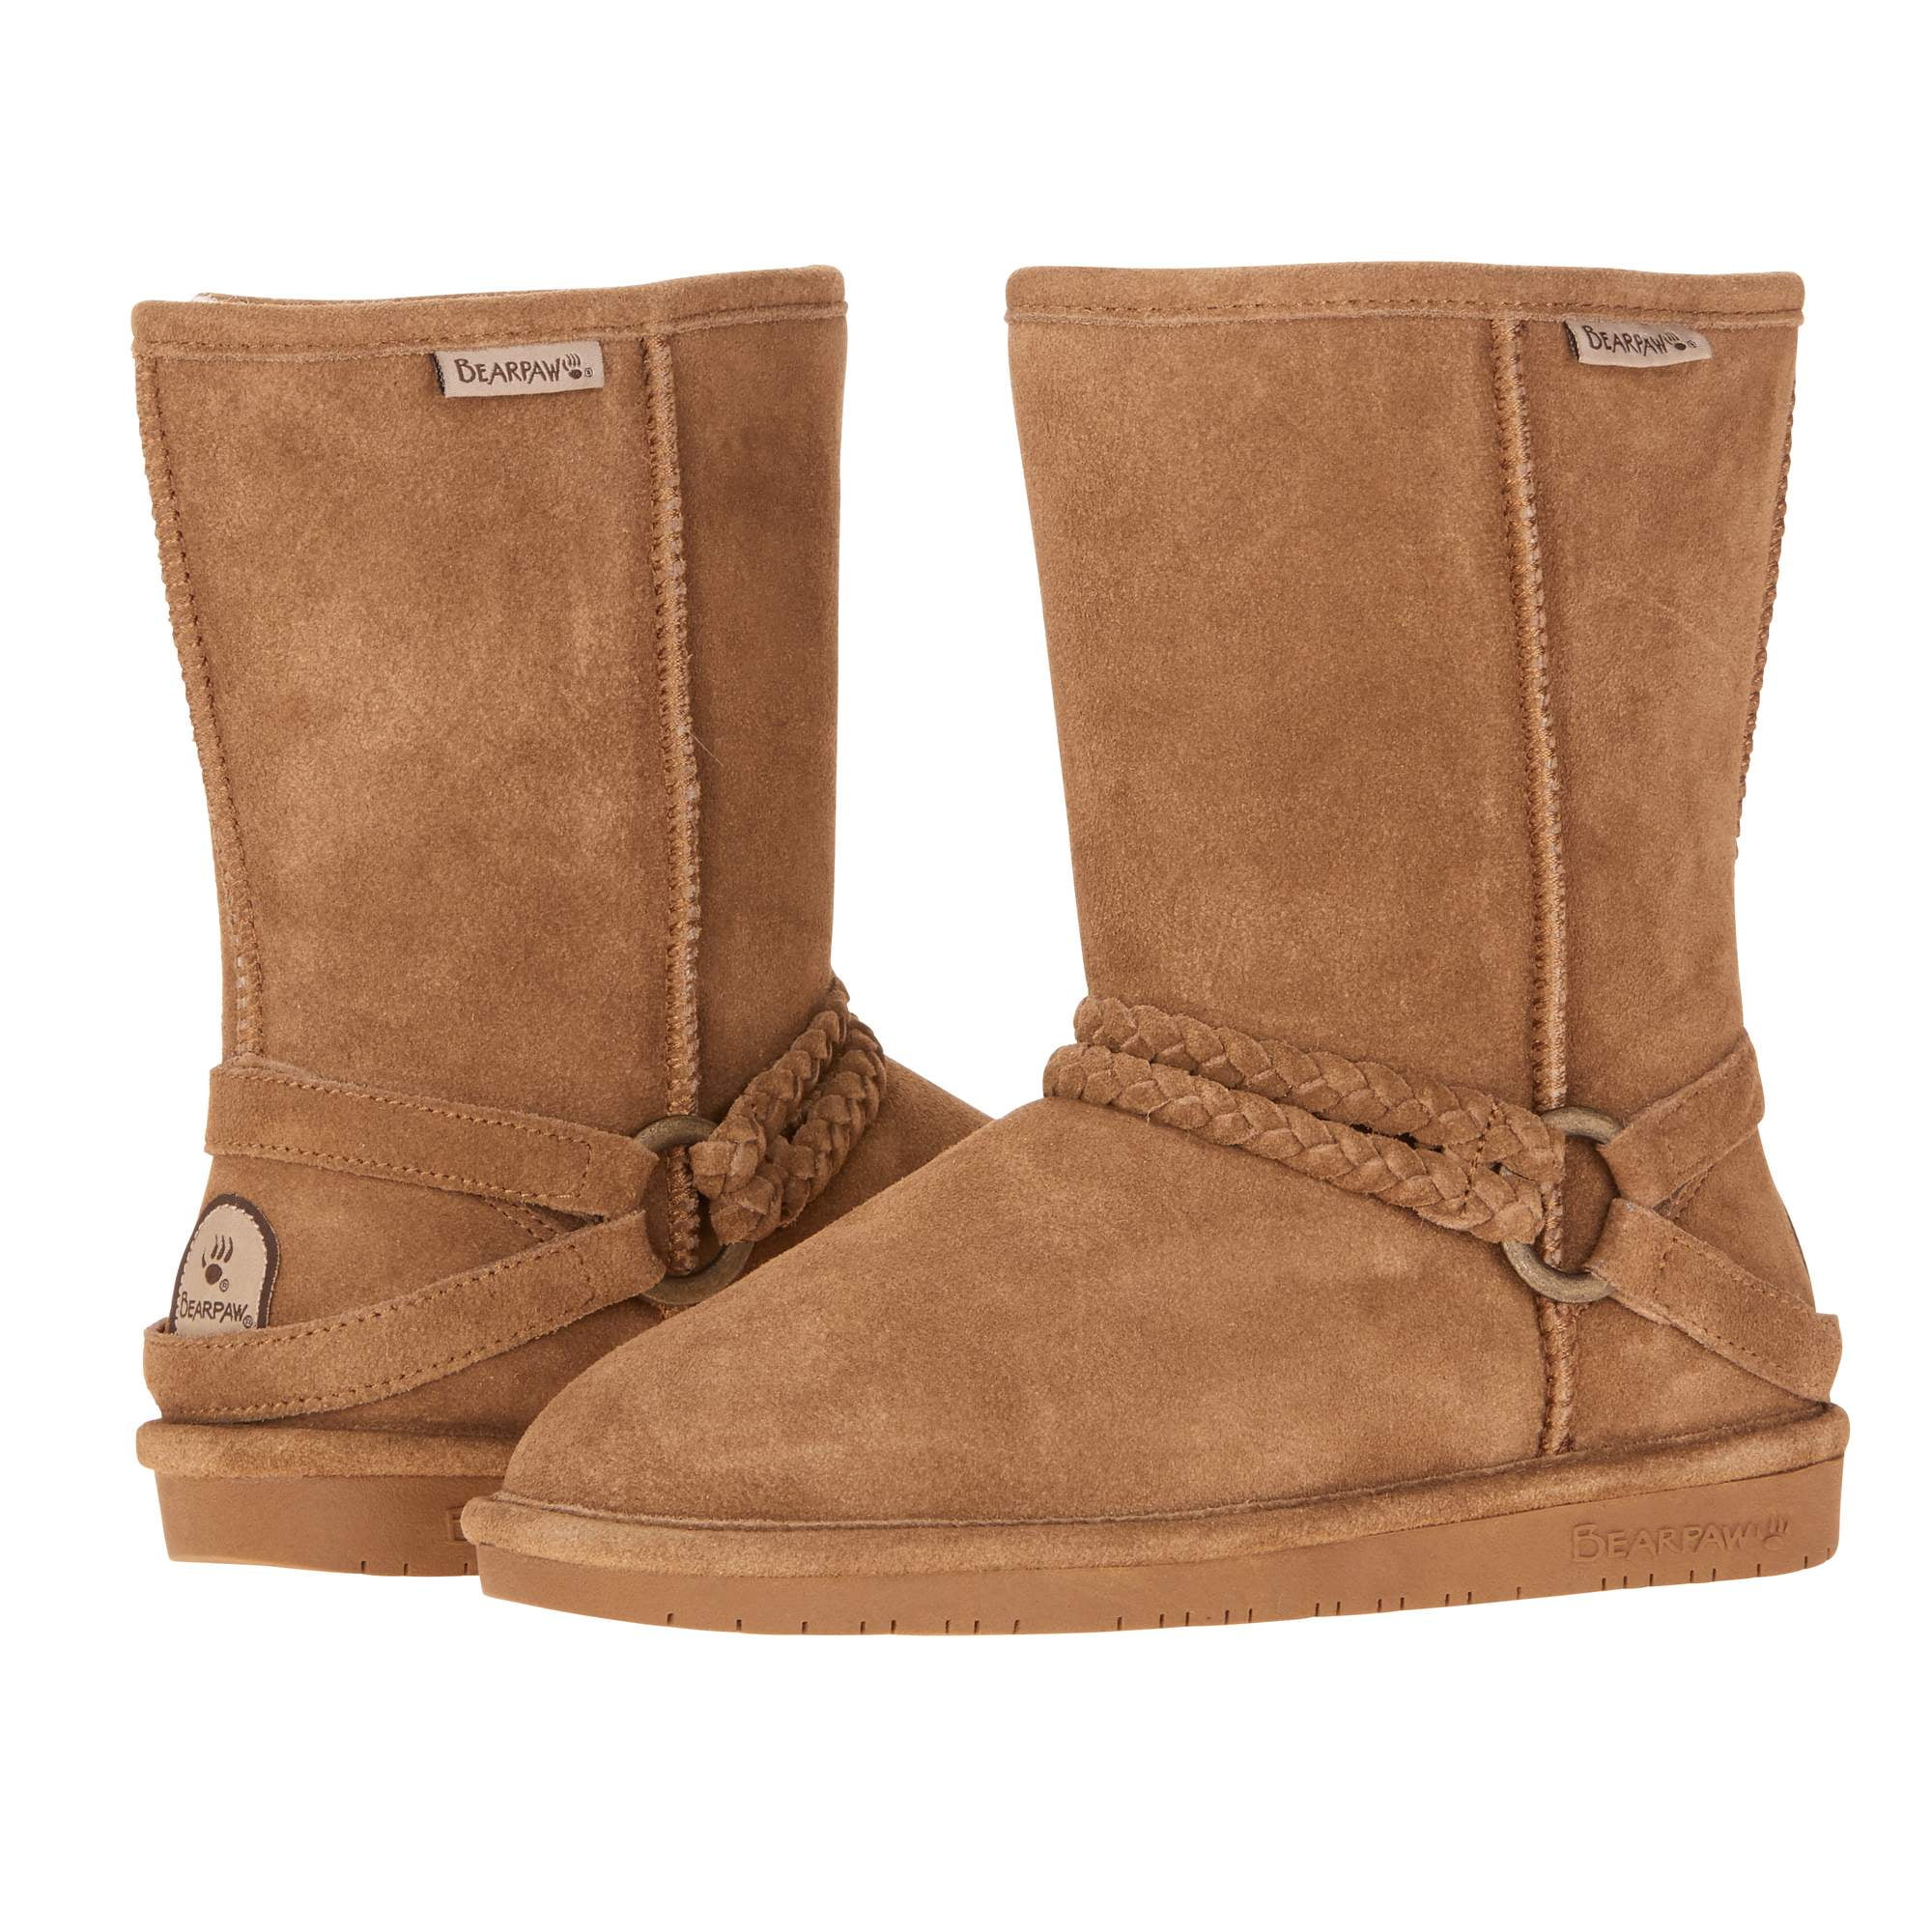 bear claw boots for women